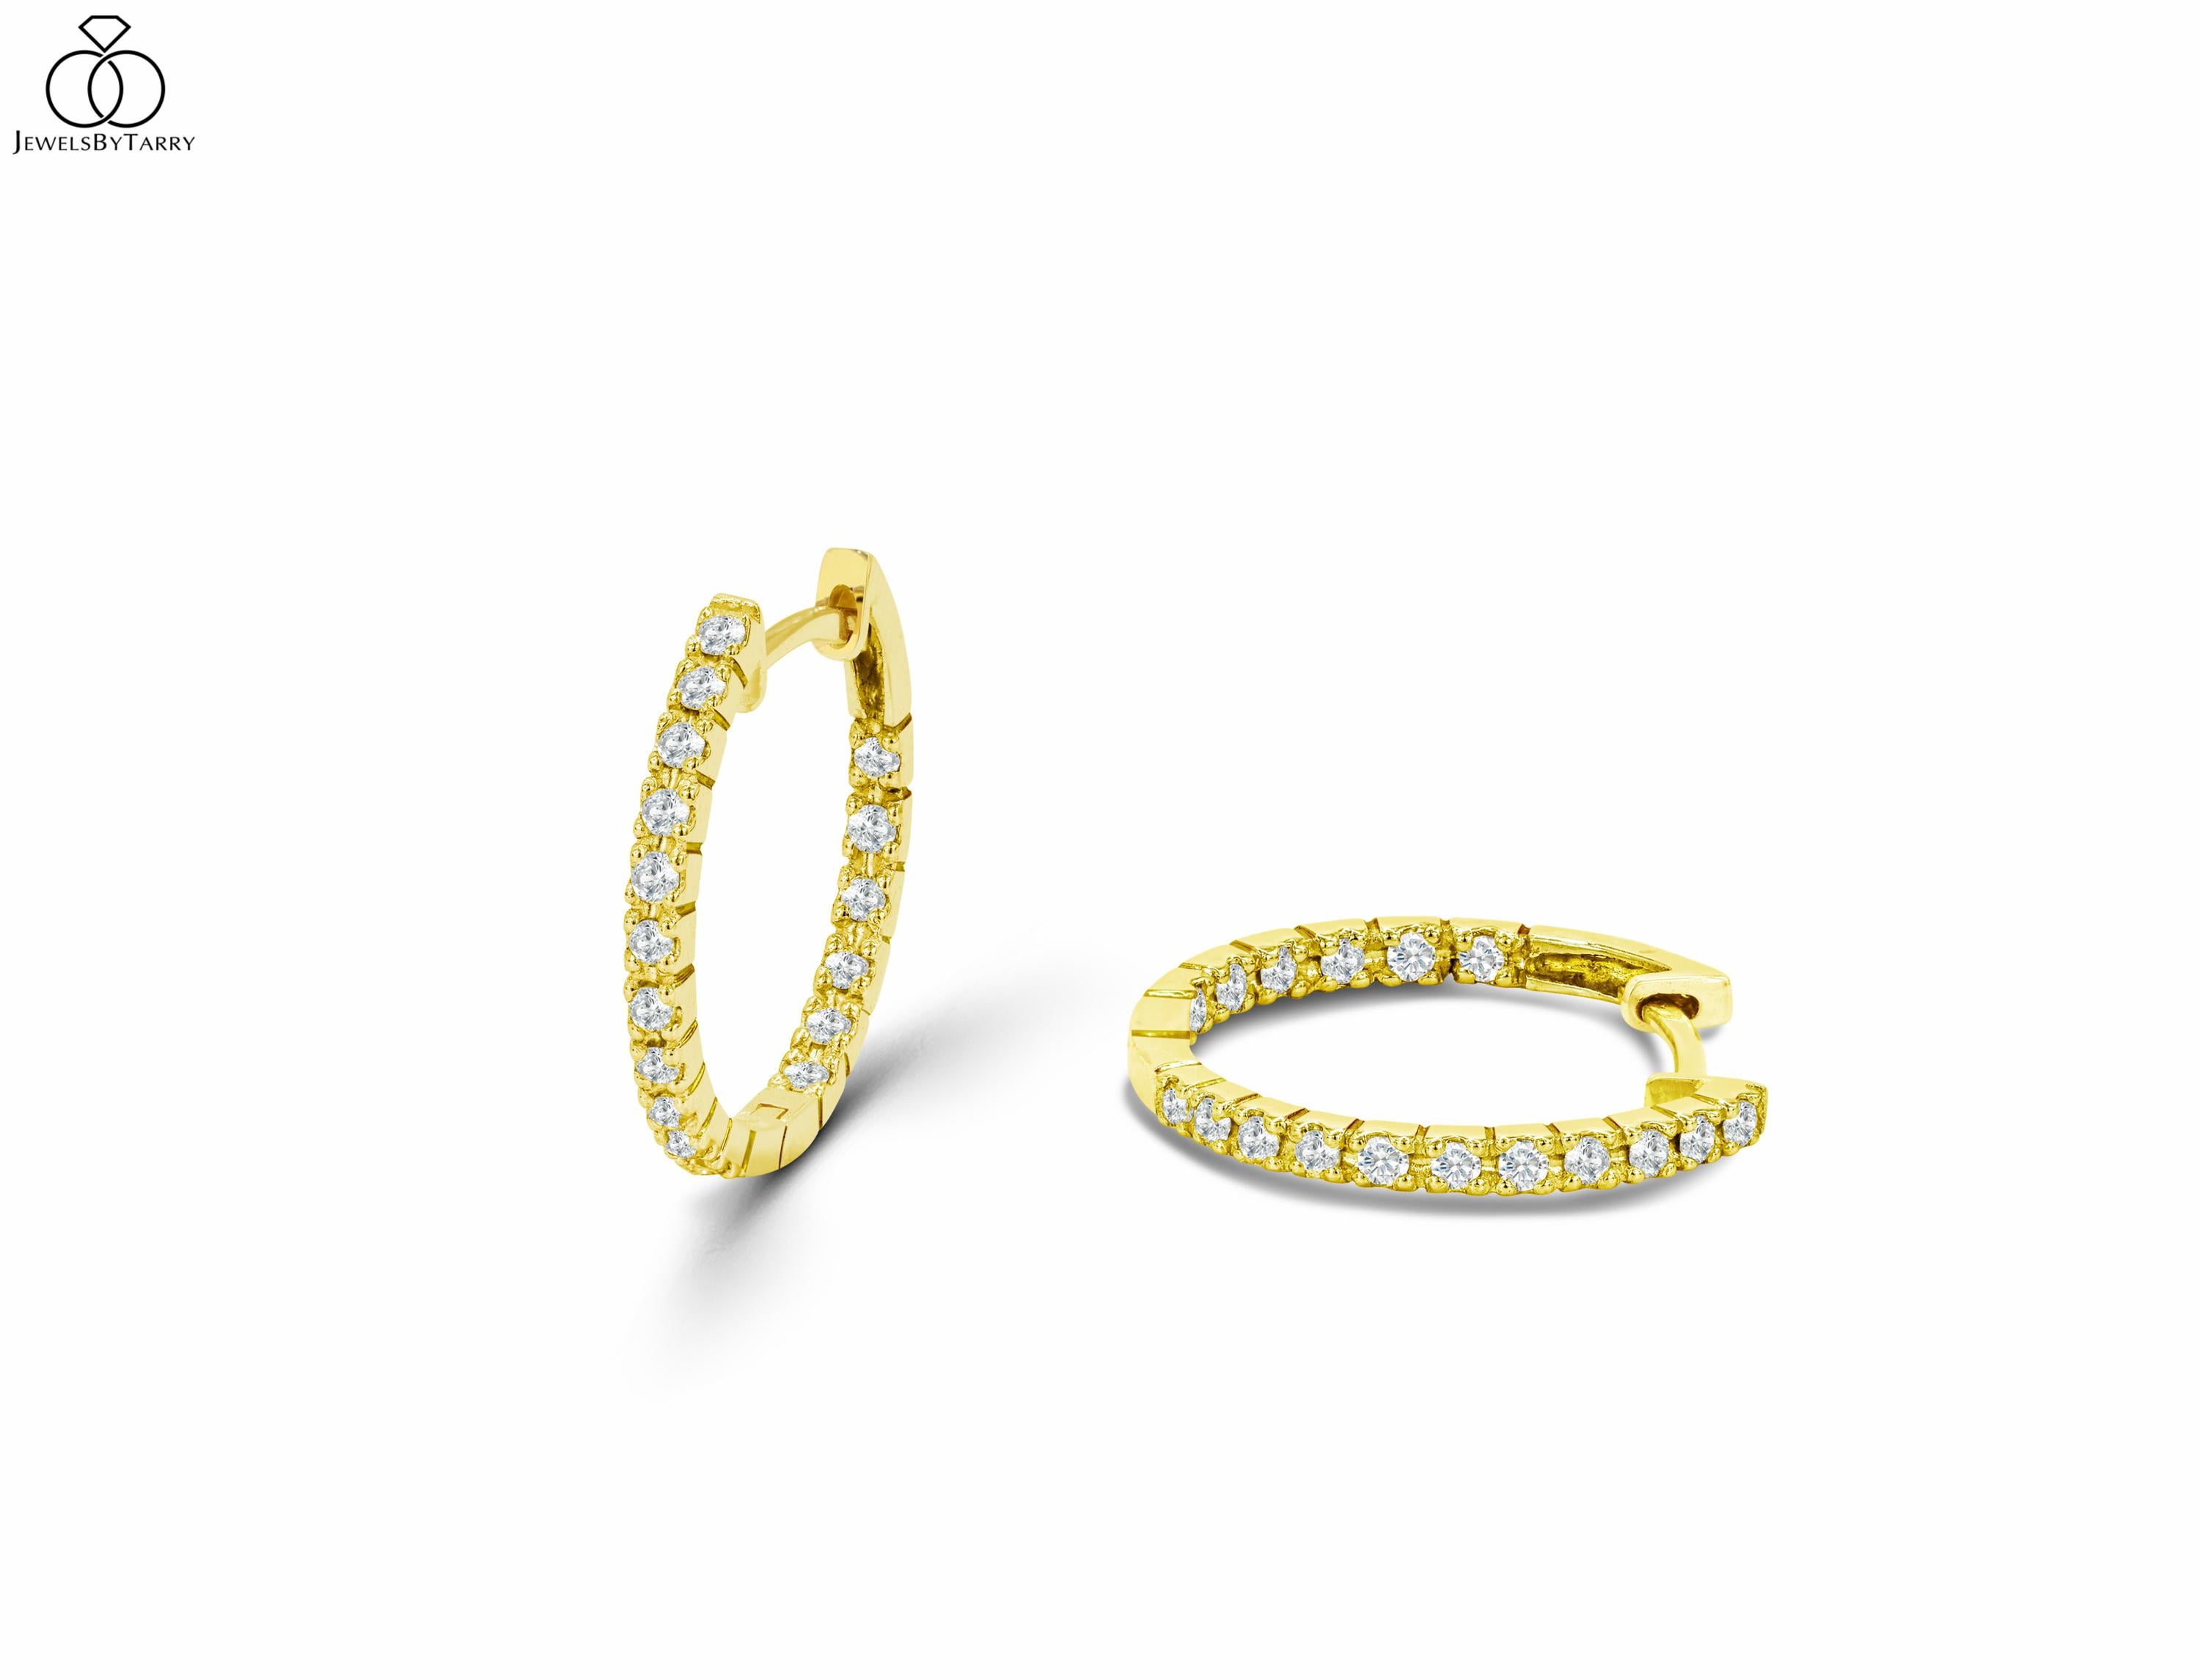 Diamond Hoop Earring / 18K Gold Diamond Huggie Earring / Solid Gold Huggie Earrings / Medium Size Gold Hoop Wedding Jewelry Gift

Classic pave diamond Hoop earrings set in solid 18K gold. 18 mm hoop earrings perfect by itself or paired with other